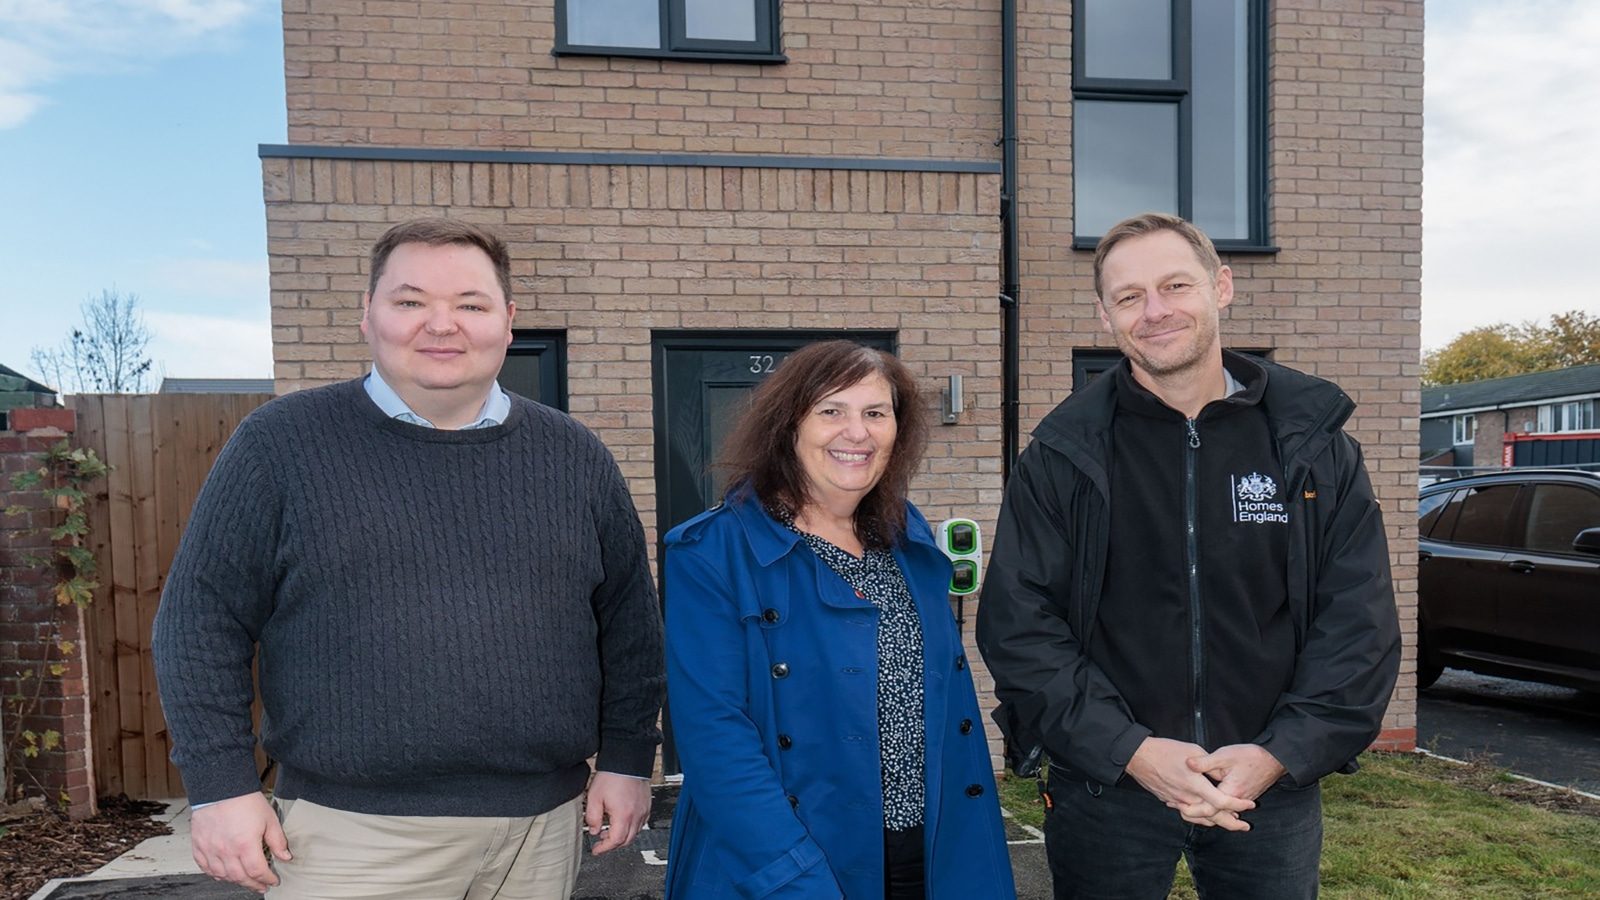 Trafford Council leader, Cllr Andrew Western, joined partners at an event to mark the handover of the latest affordable homes at the Sale West estate.